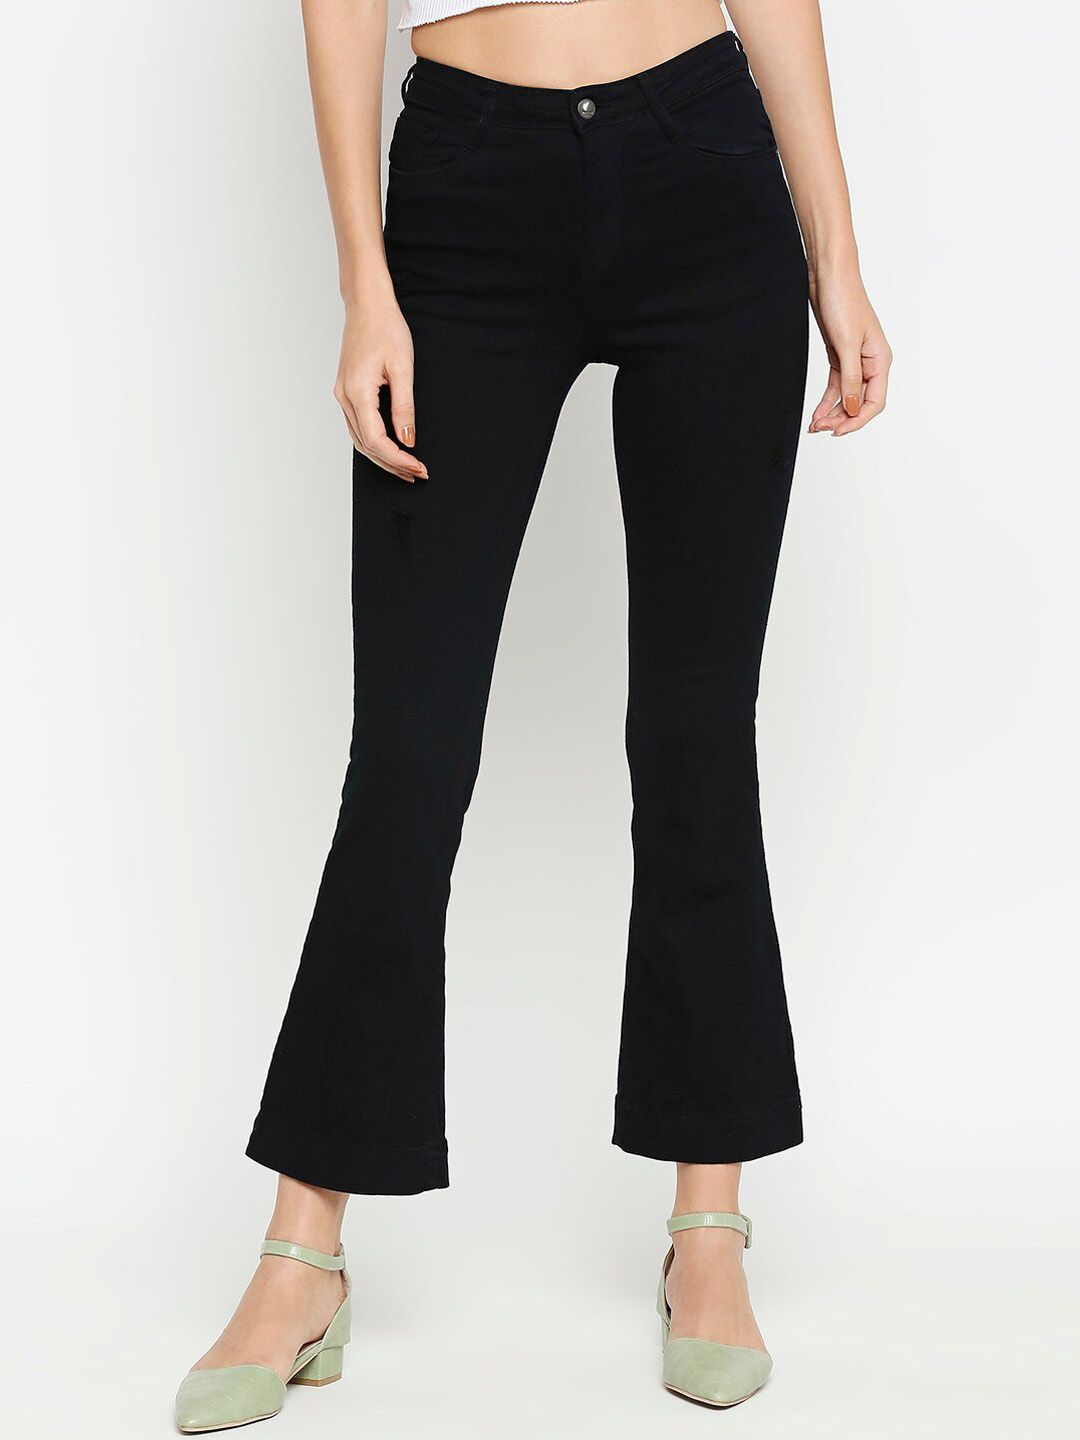 Kraus Jeans Women Black Flared High-Rise Jeans Price in India